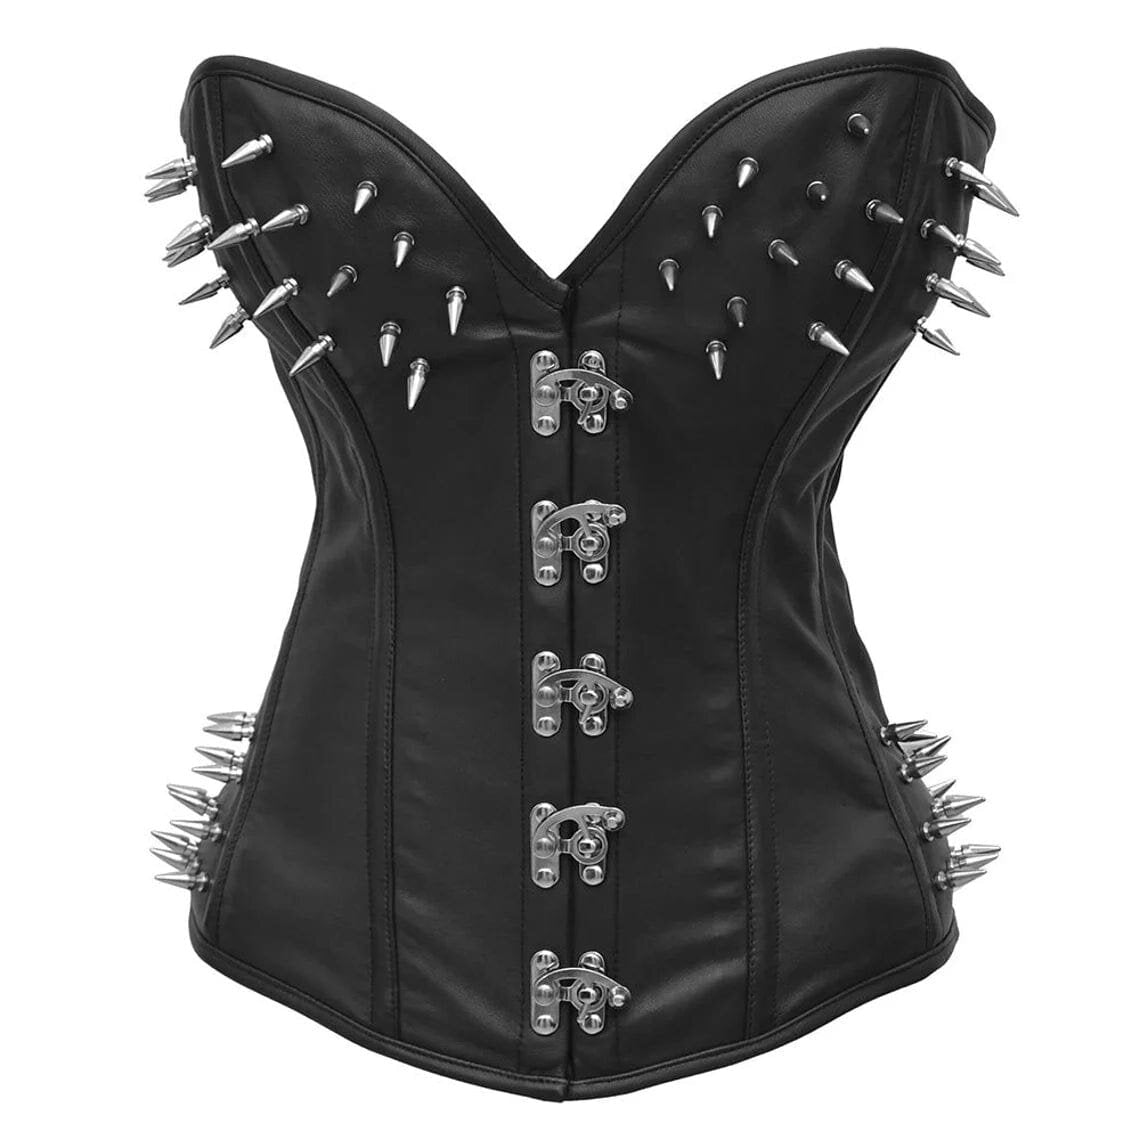 Shop our Steampunk Corset Overbust at the Lowest Price Right Now